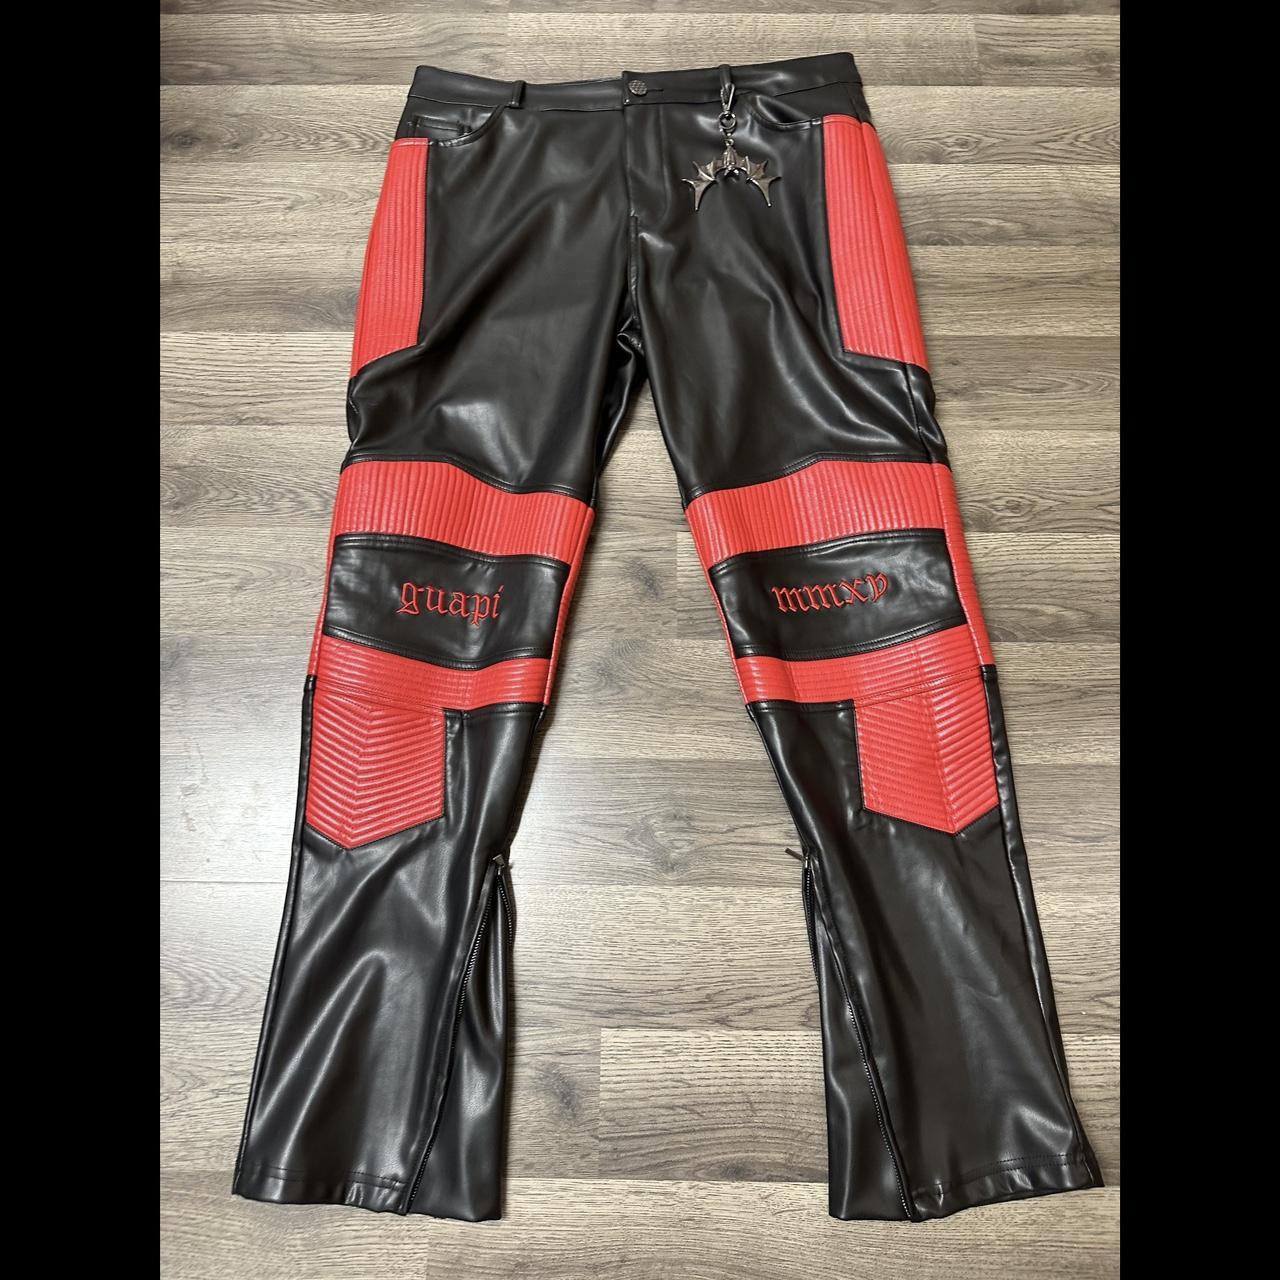 Limited Edition 1 of 100 Guapi Black and Red Faux... - Depop